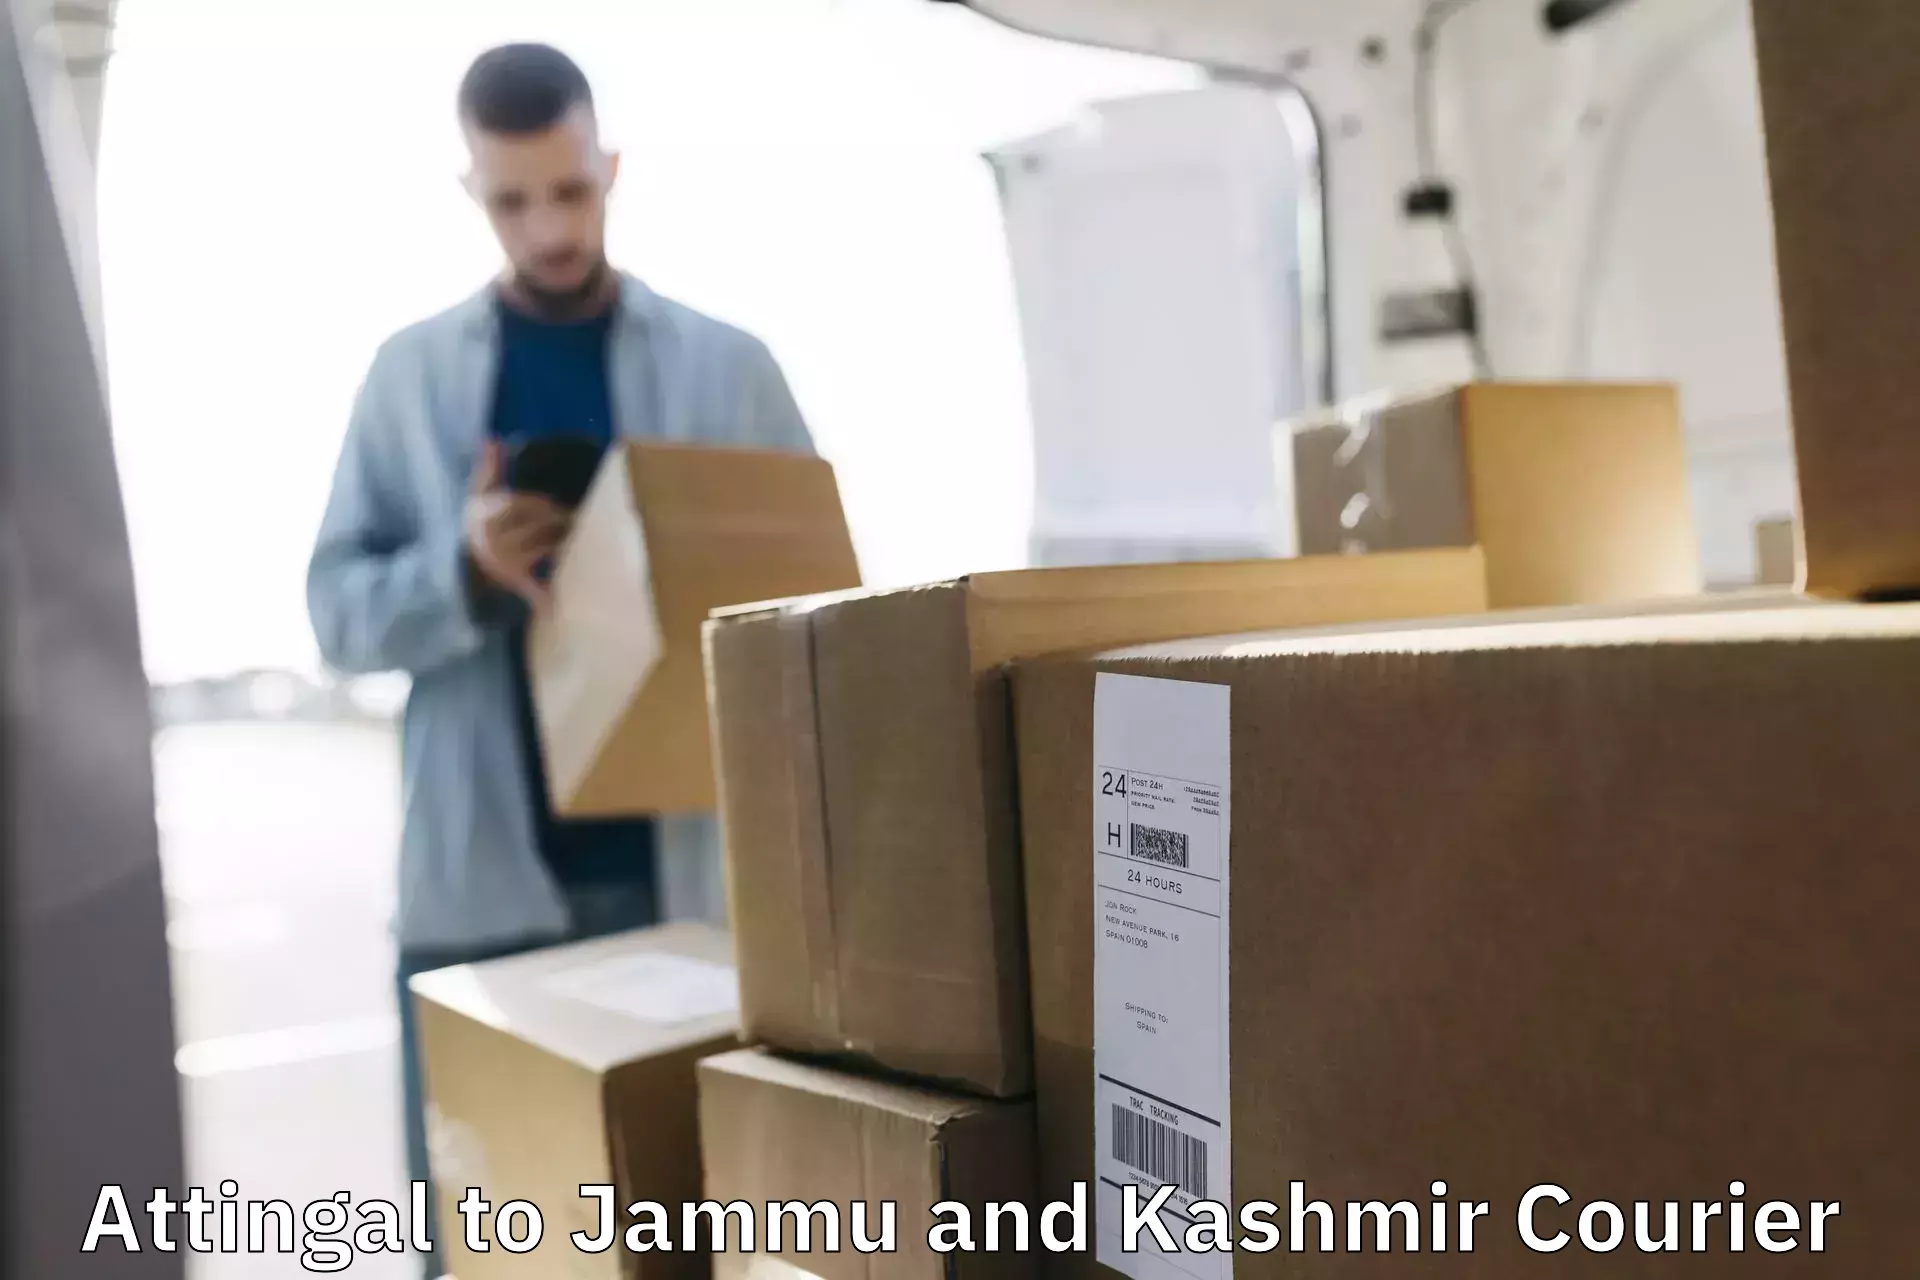 Specialized shipment handling in Attingal to Jammu and Kashmir